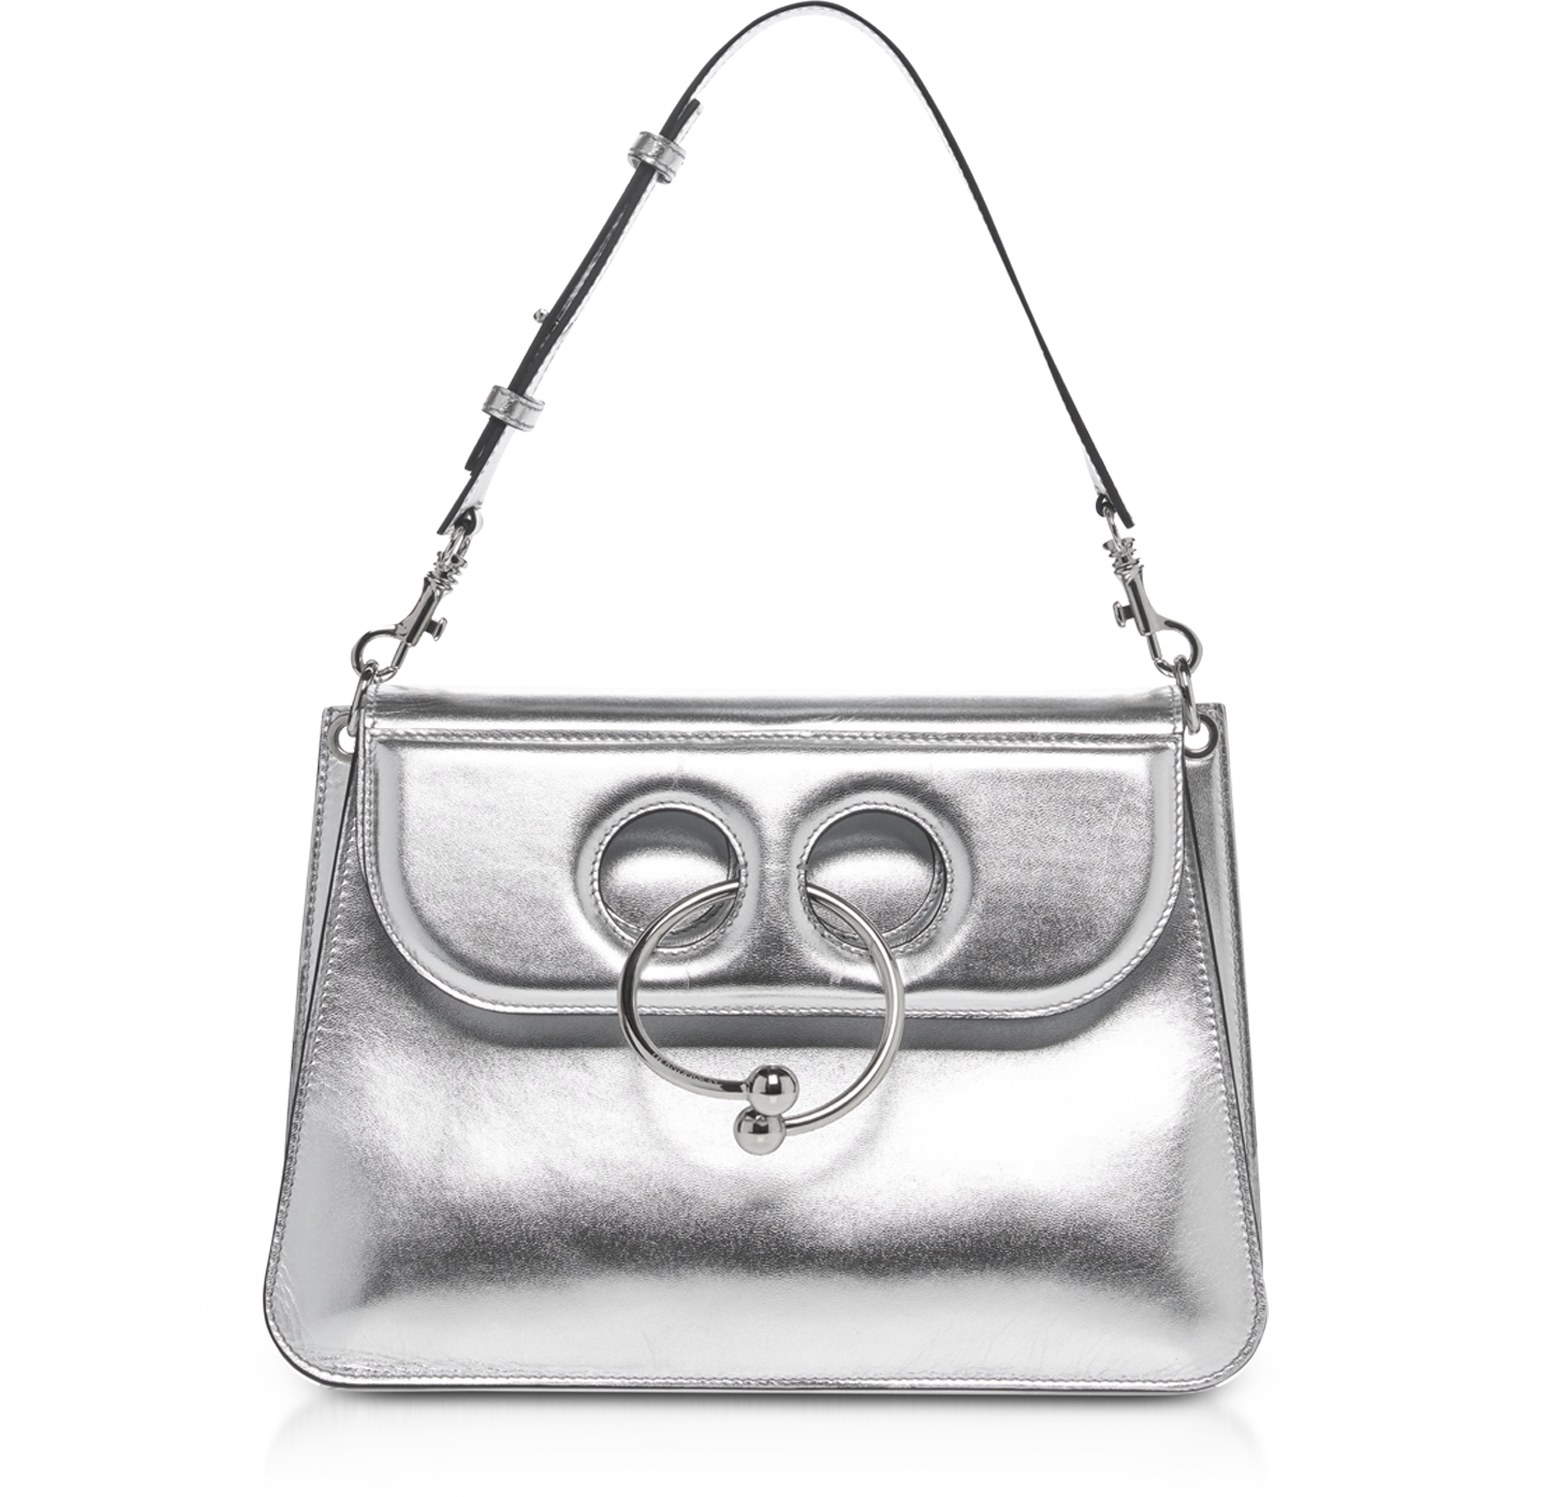 silver leather bag